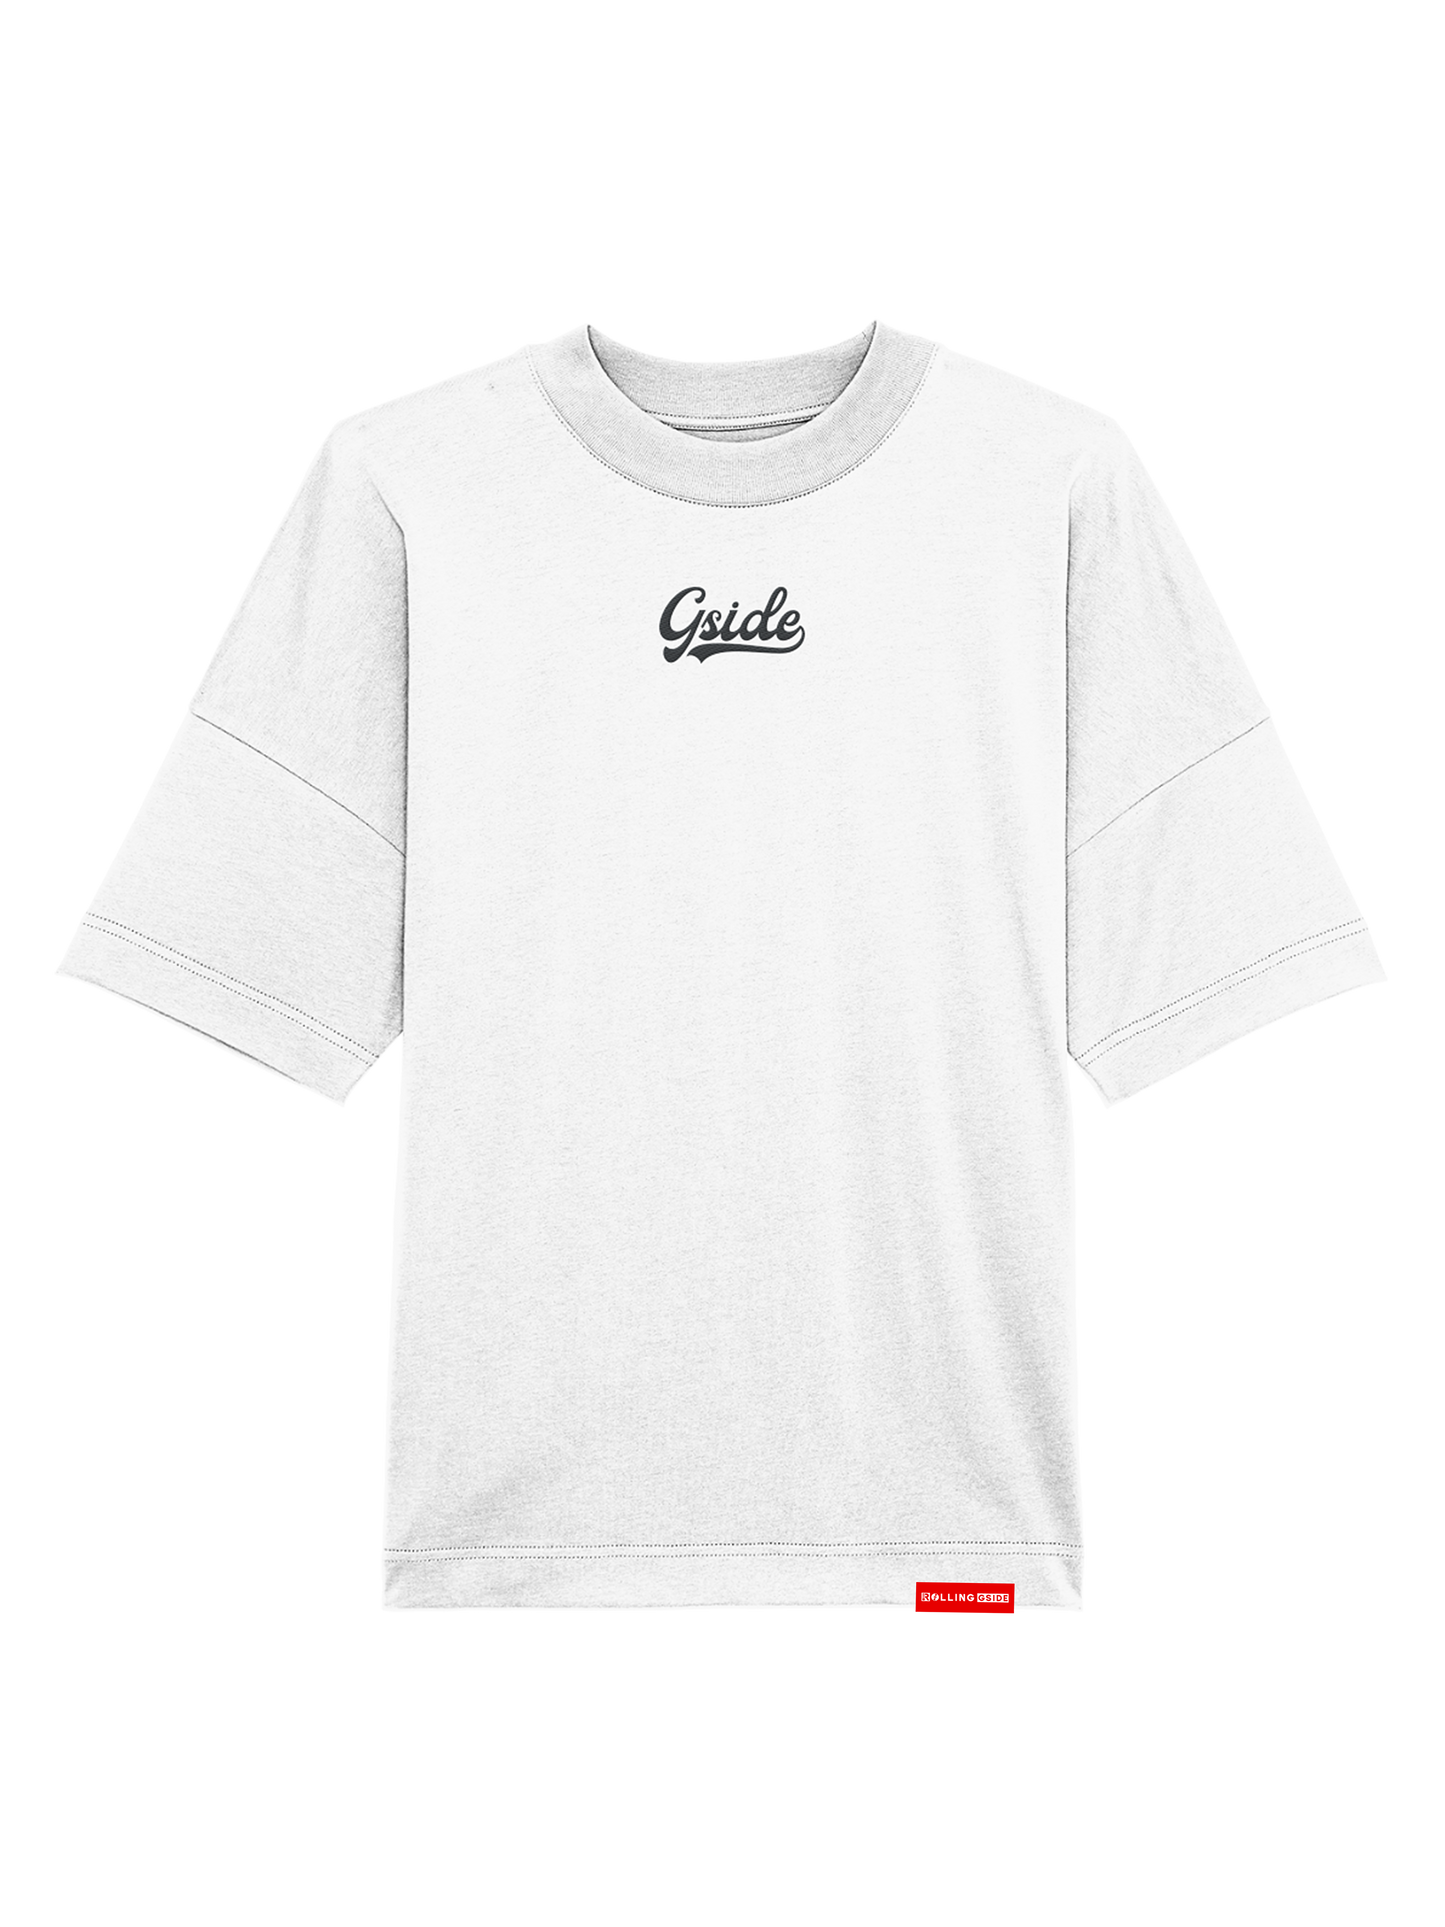 Gside Oversize Embroidered T-Shirt